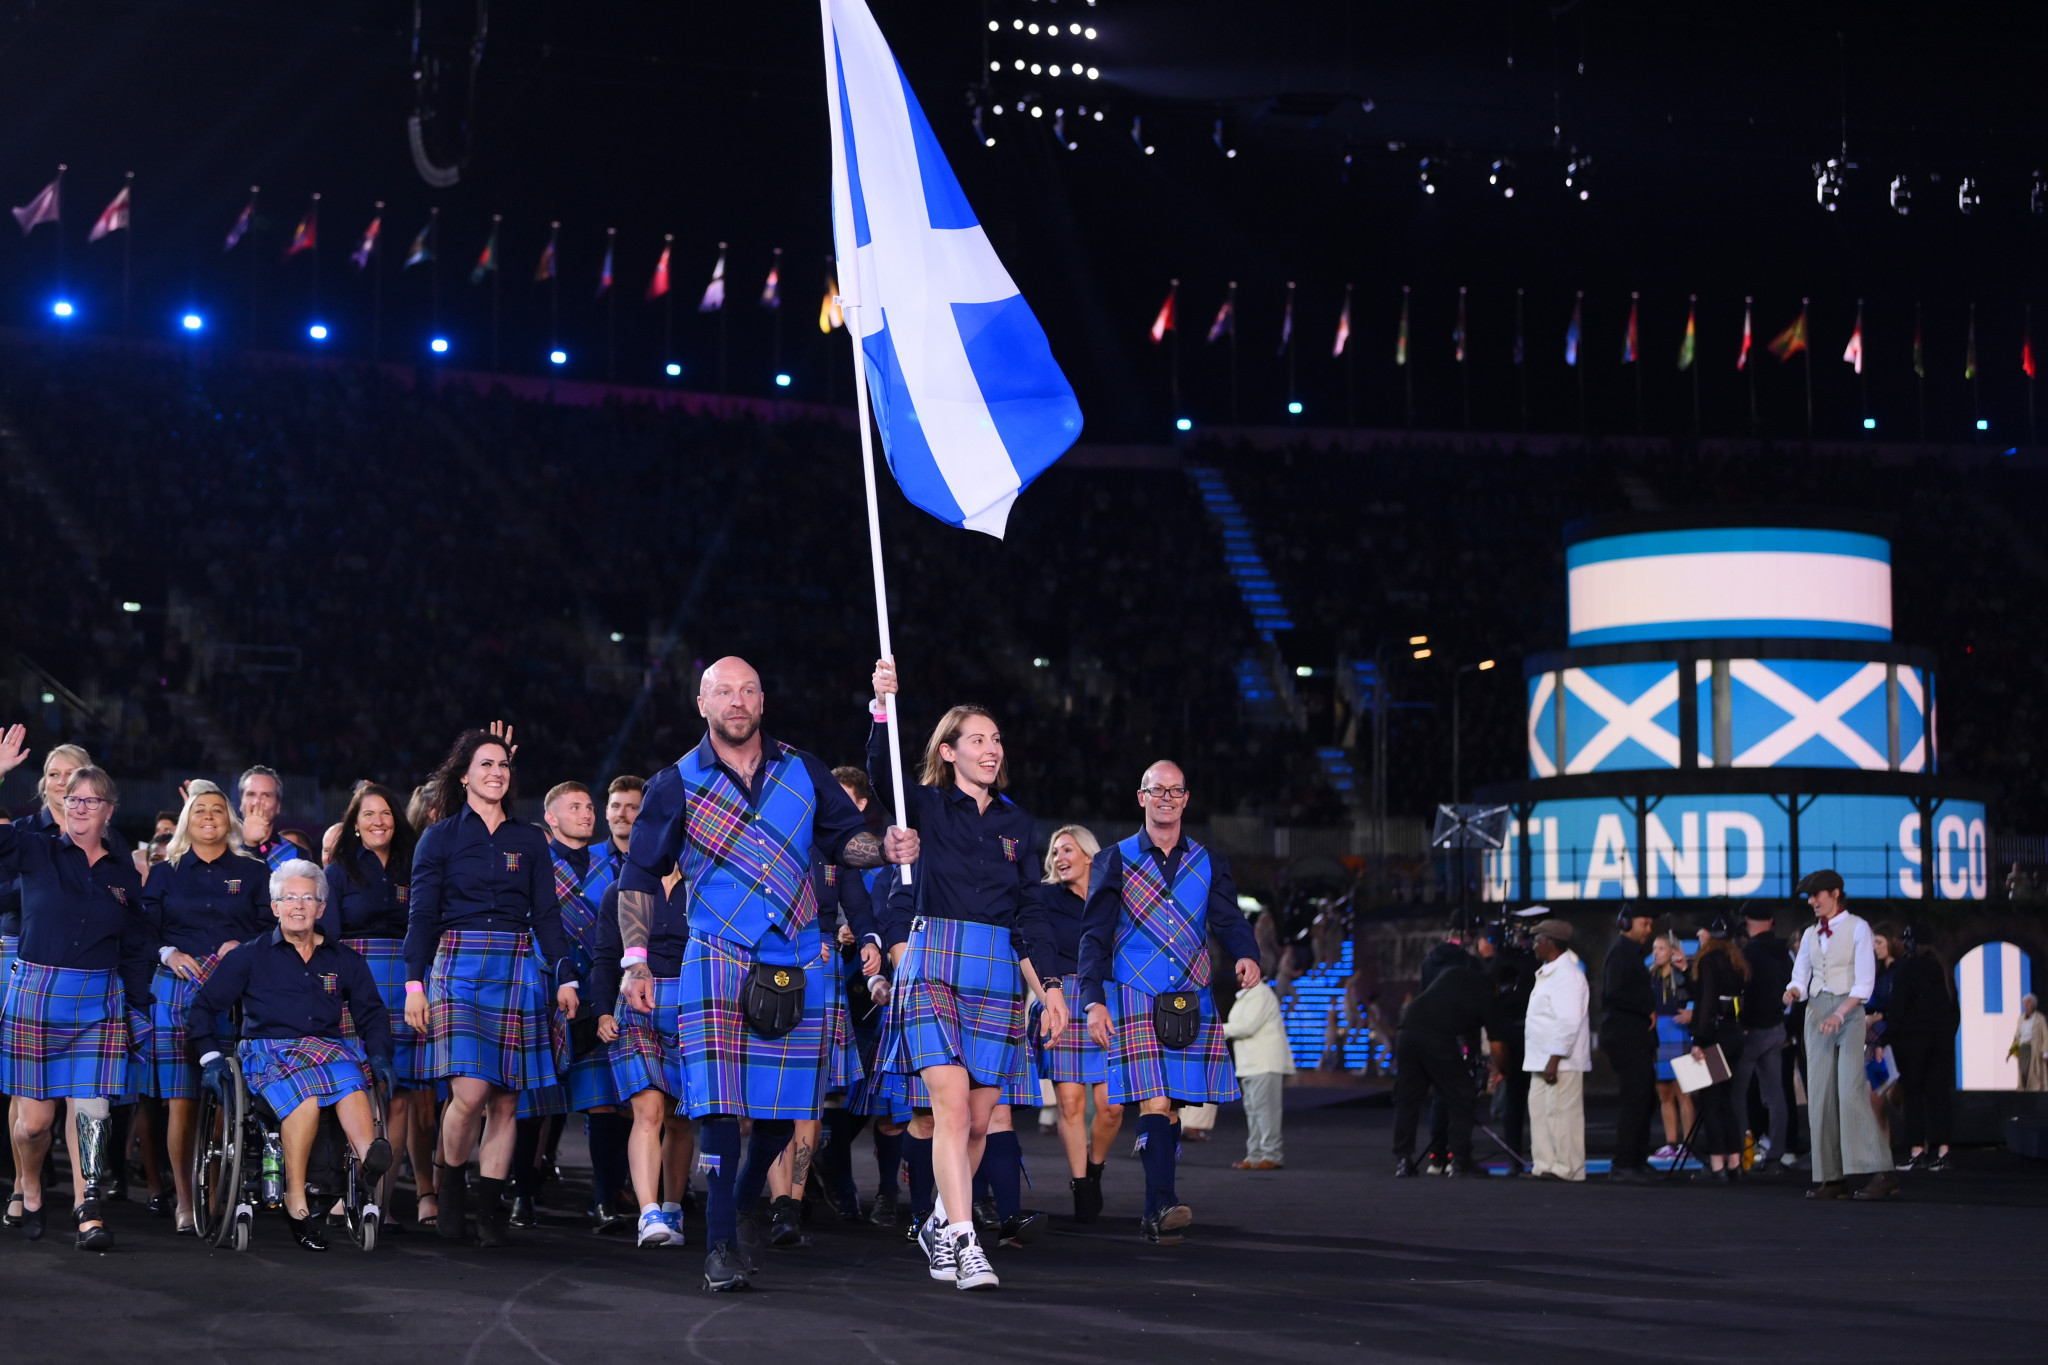 Commonwealth Games Scotland is seeking a new chair to lead it through Victoria 2026, after the nation won 13 golds at Birmingham 2022 ©Getty Images